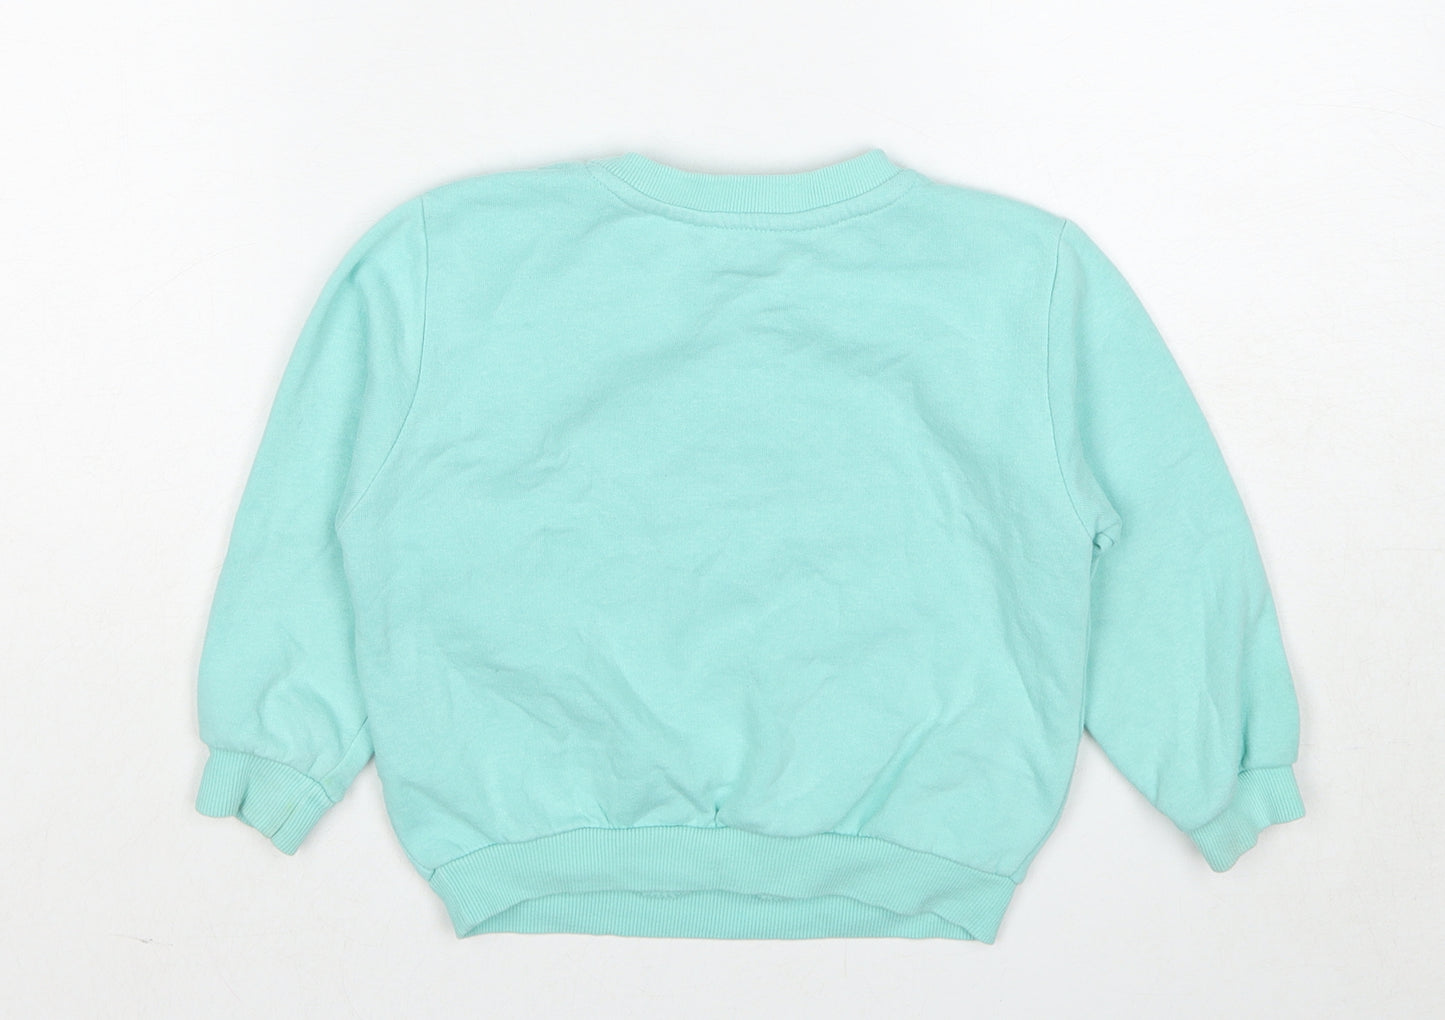 H&M Girls Blue Cotton Pullover Sweatshirt Size 2-3 Years Pullover - Age 2-4 Years The Wild Outdoors